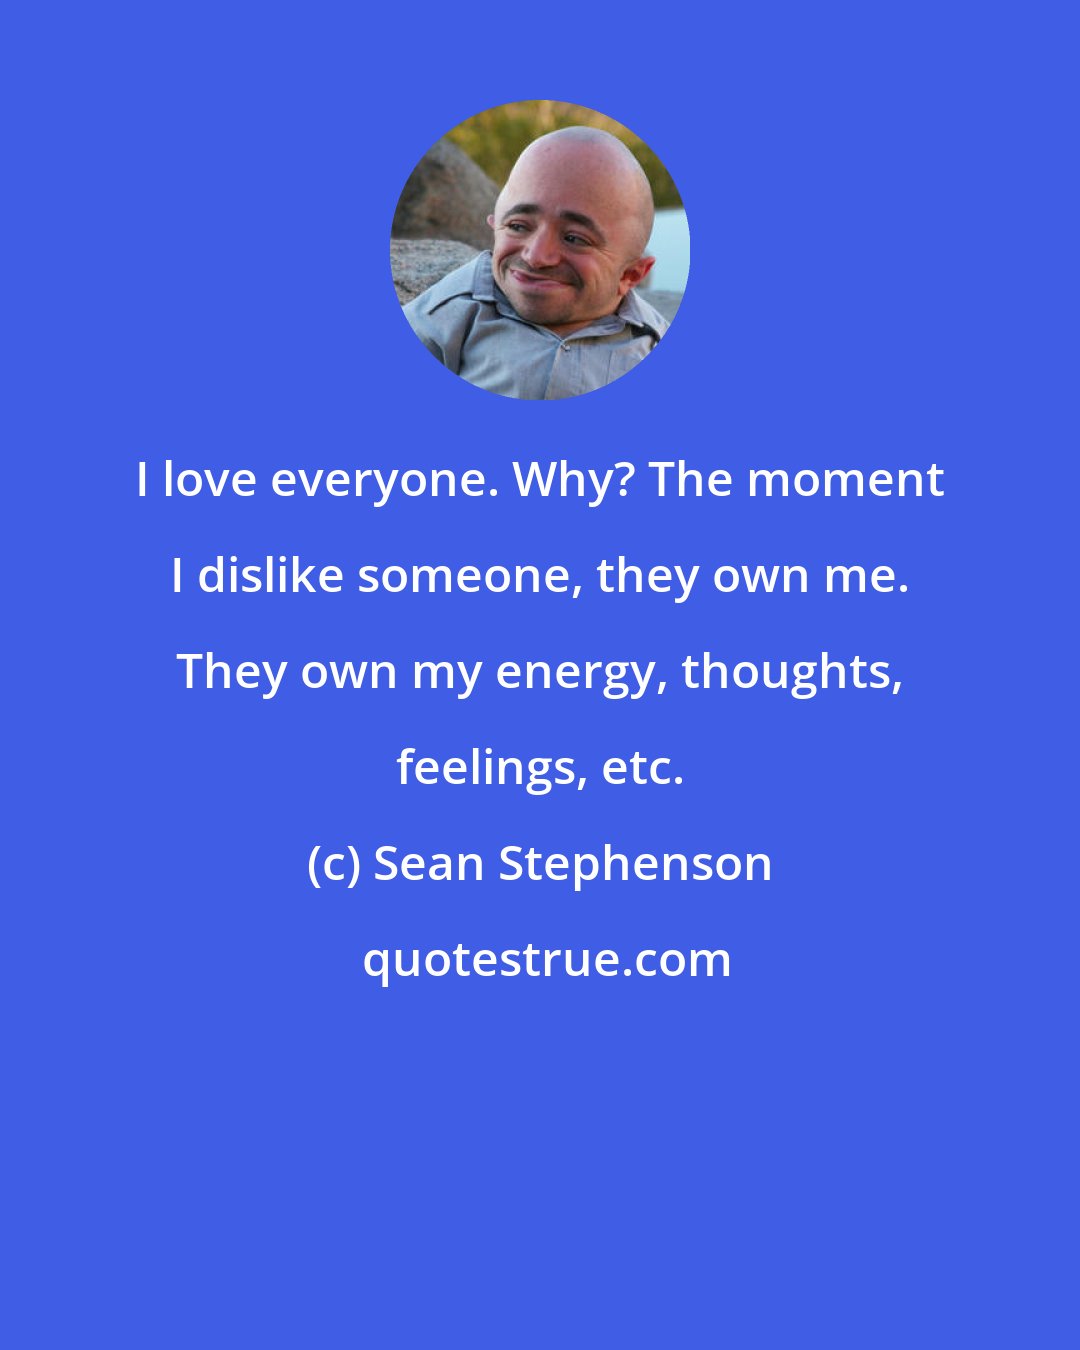 Sean Stephenson: I love everyone. Why? The moment I dislike someone, they own me. They own my energy, thoughts, feelings, etc.